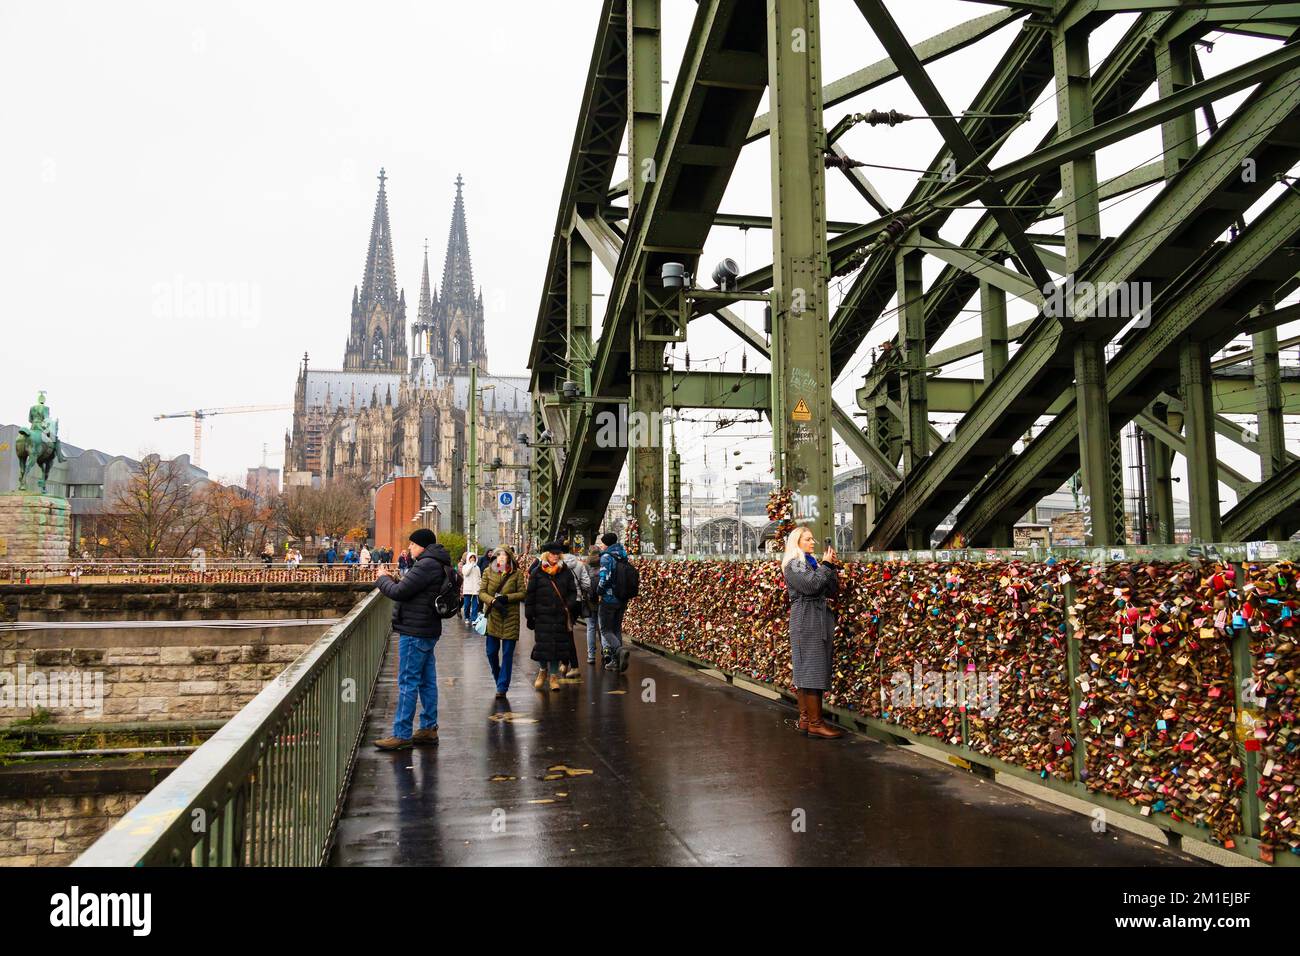 Pedestrians with a View of Koln Cologne cathedral Dom, from the Hohenzollernbrucke, Hohenzollern bridge, Germany. The railings are covered in love loc Stock Photo